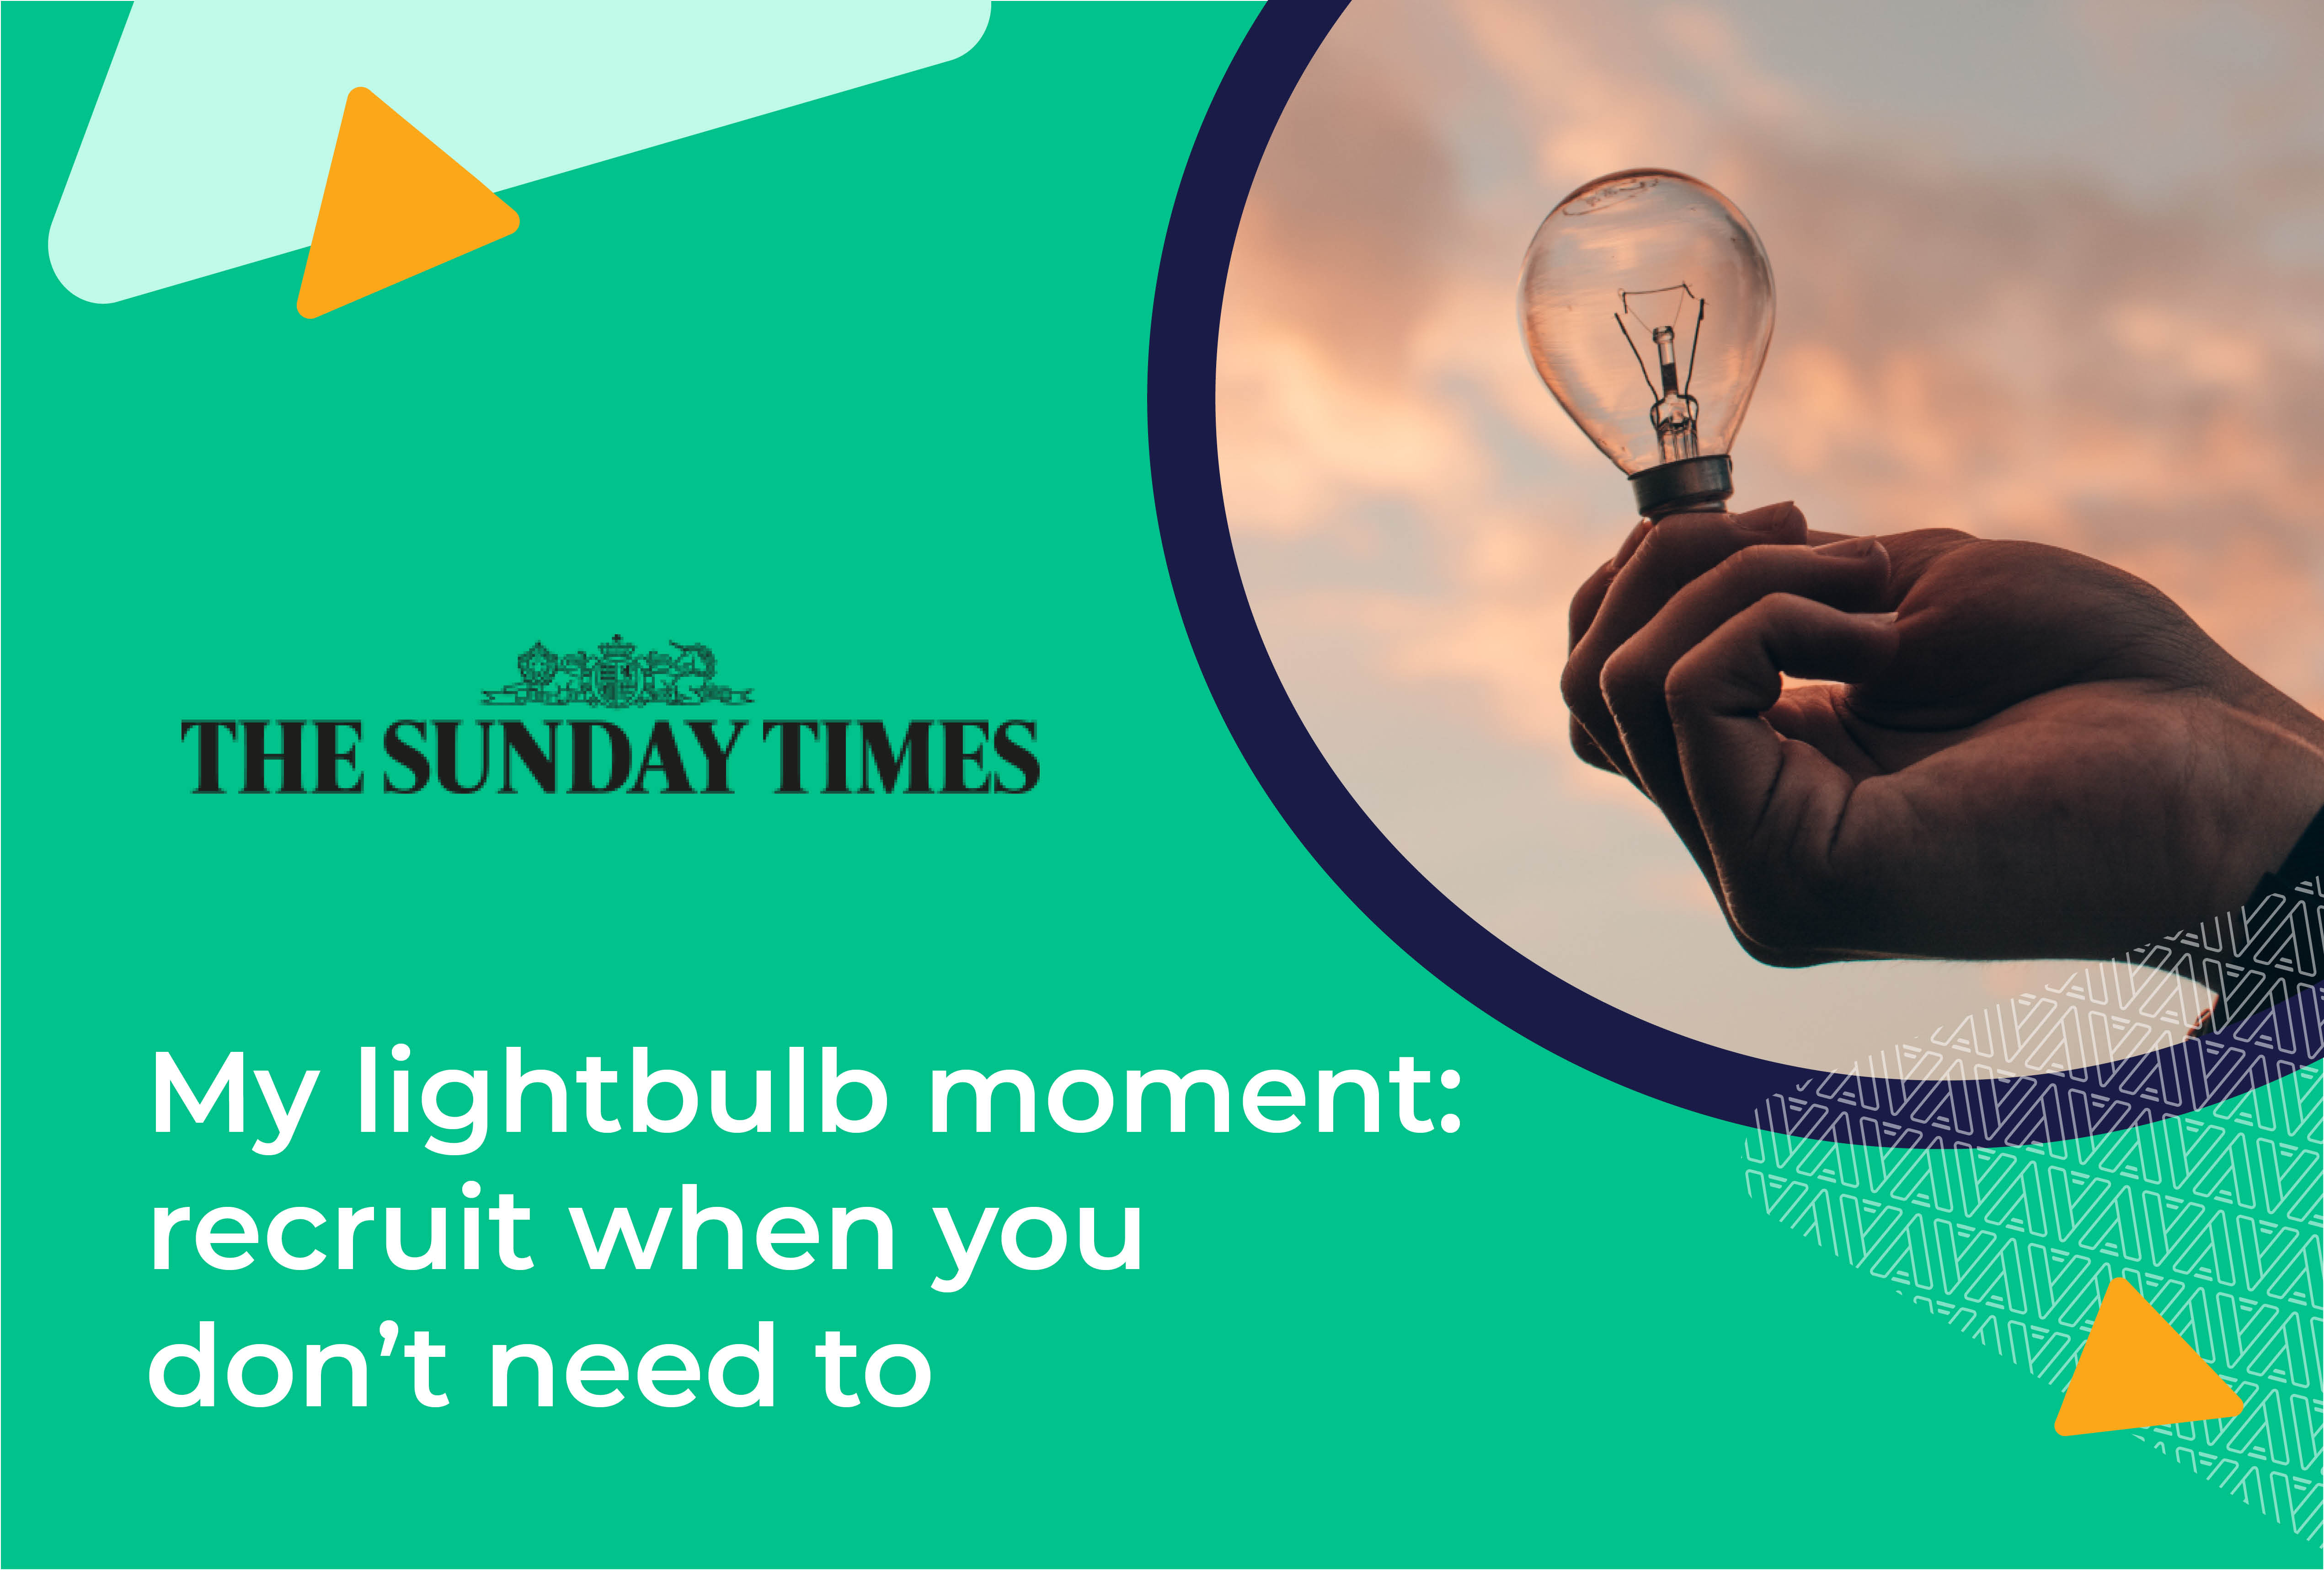 The Sunday Times: My lightbulb moment: recruit when you don’t need to, by James Timpson